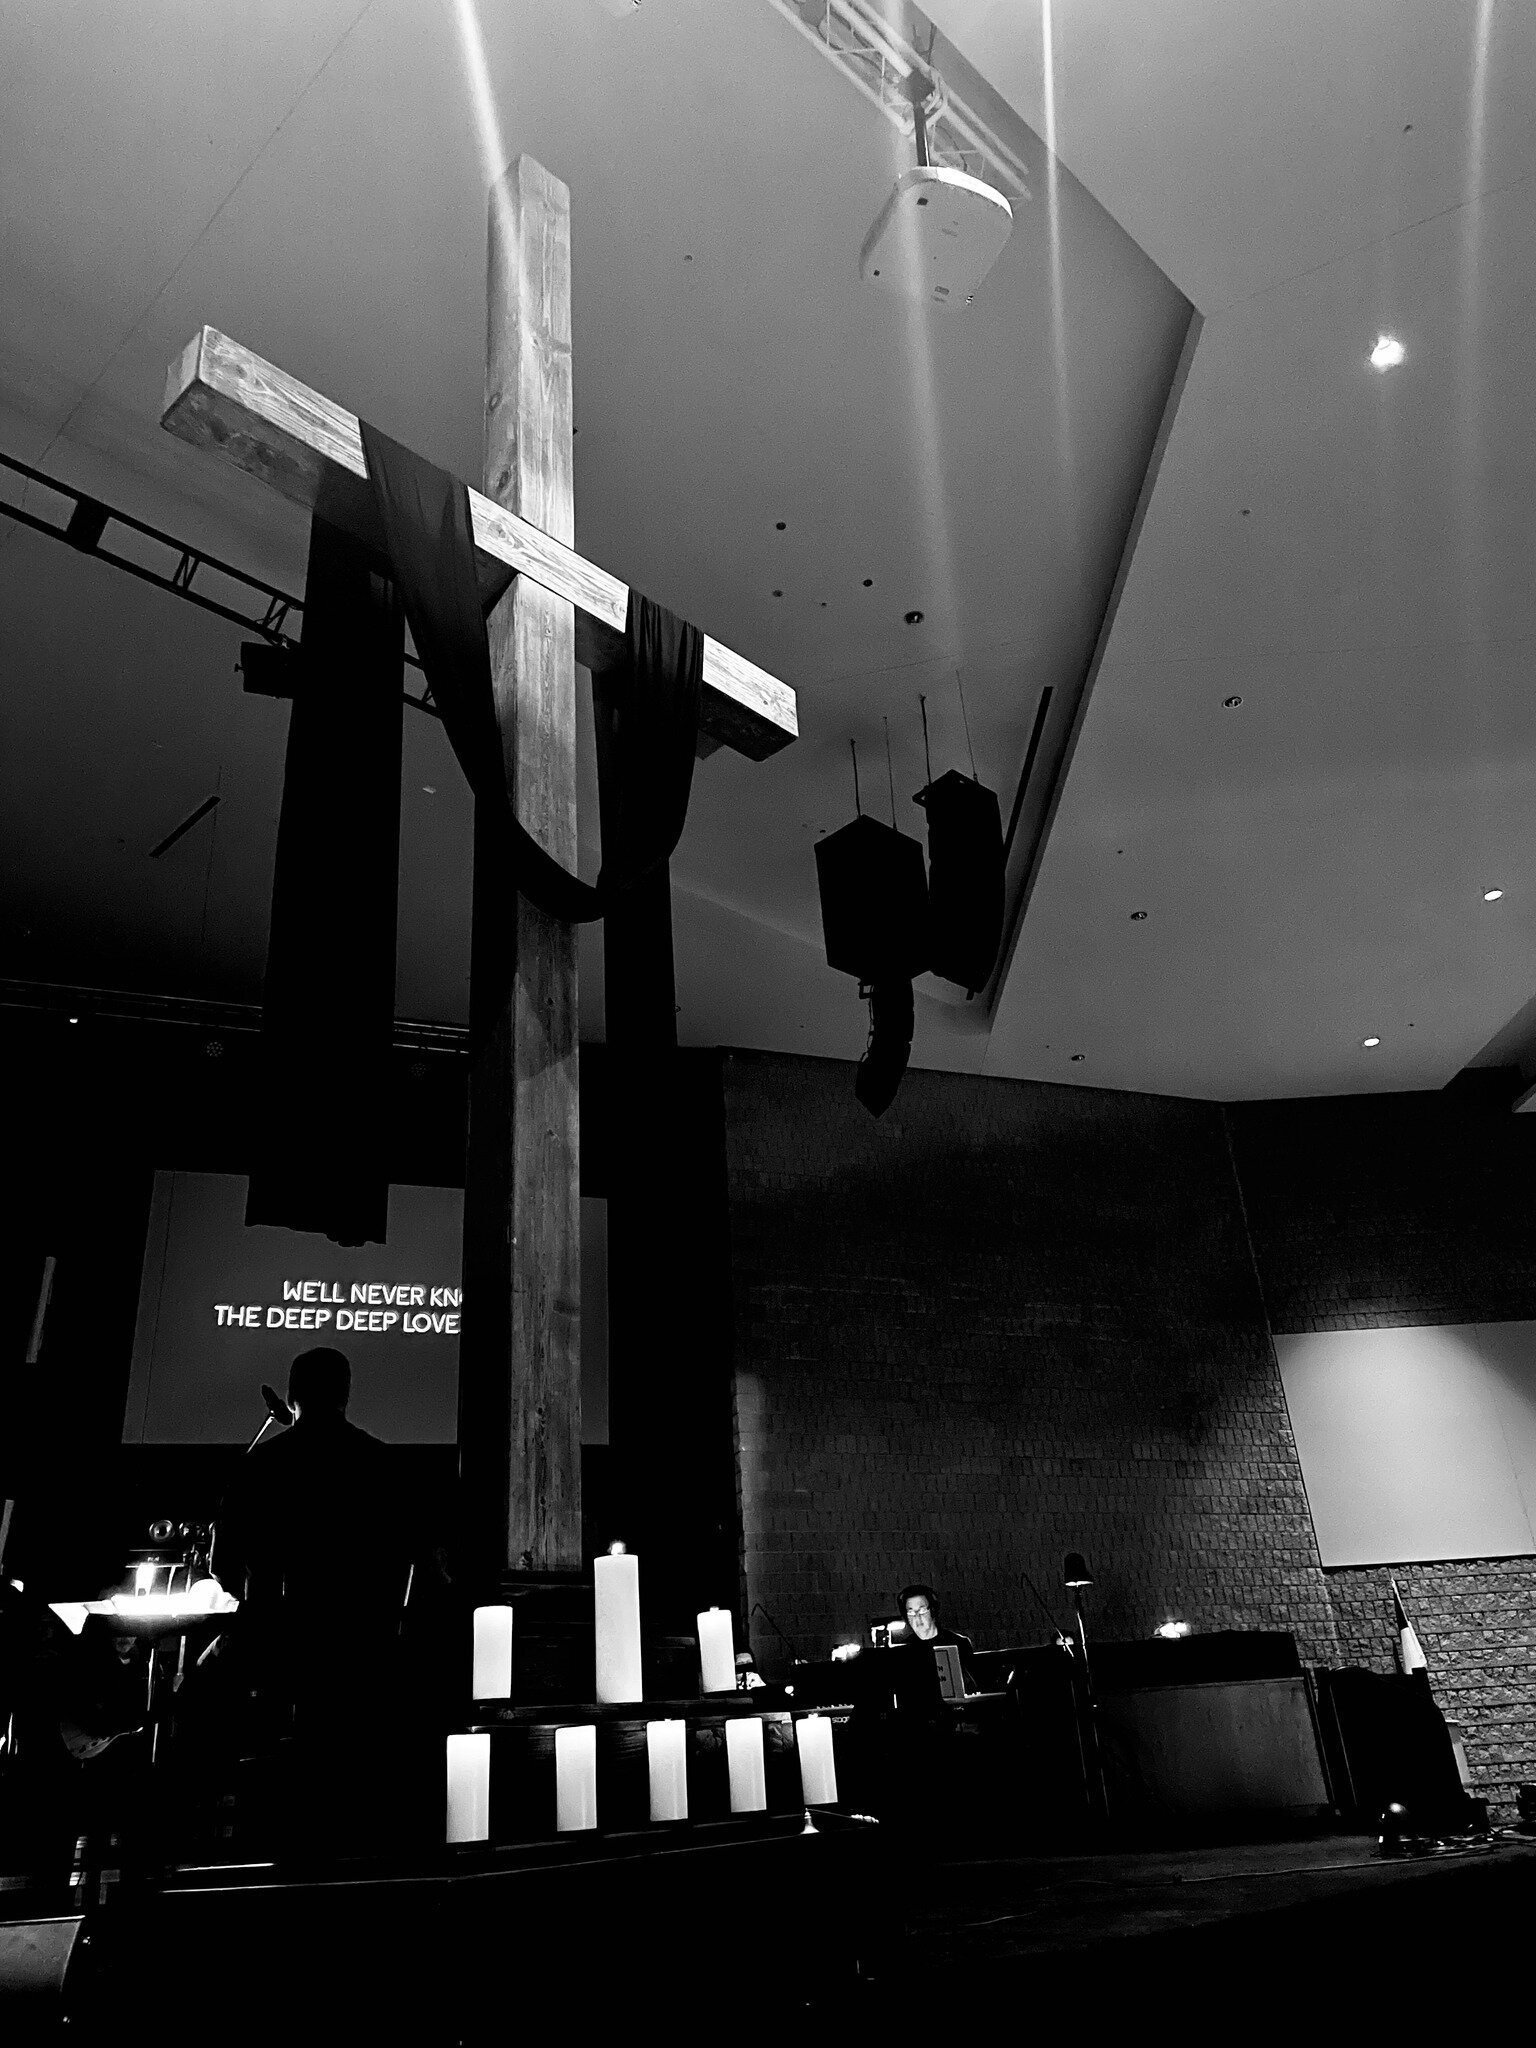 This Friday is our Good Friday service where we will remember the ultimate sacrifice, the life of Jesus Christ. We hope you'll join in the sanctuary from 6:30-7:30pm.

When he had received the drink, Jesus said, &quot;It is finished.&quot; With that,